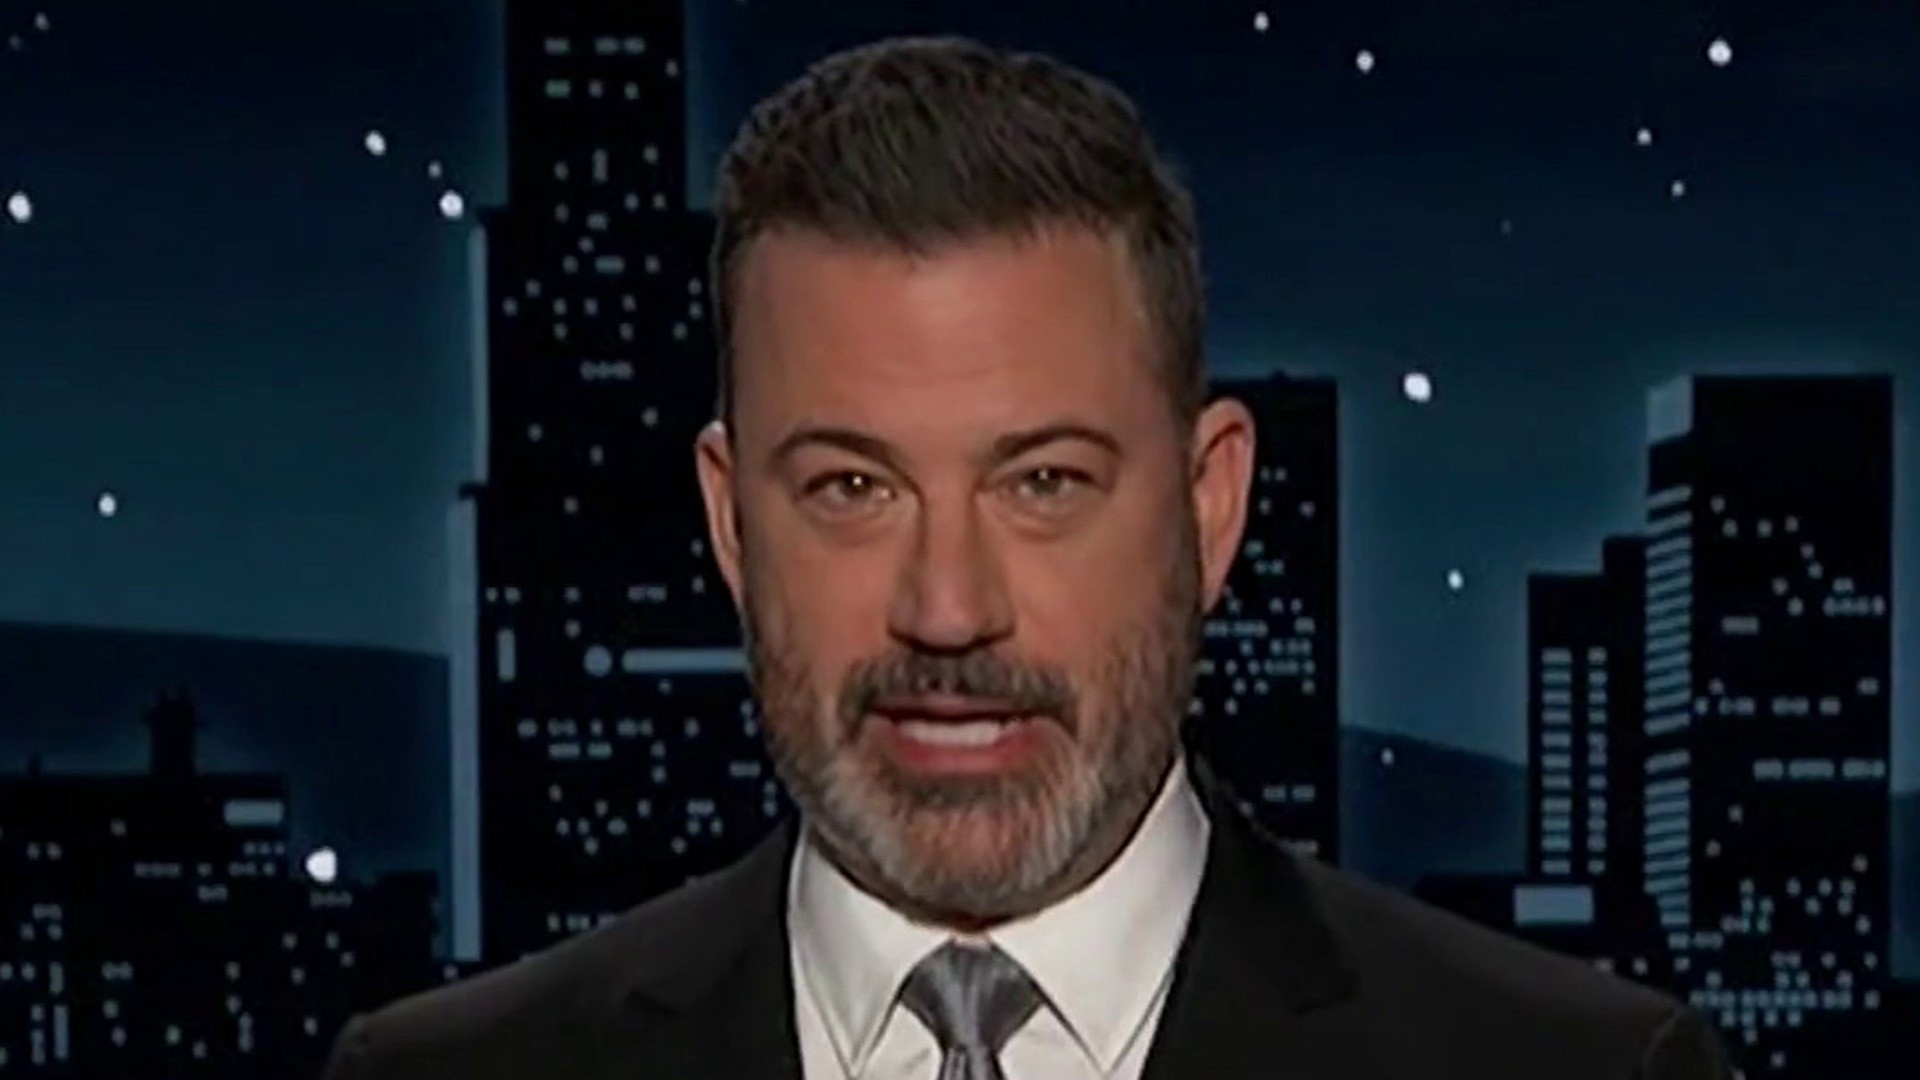 Jimmy Kimmel blasts Aaron Rodgers in scathing monologue